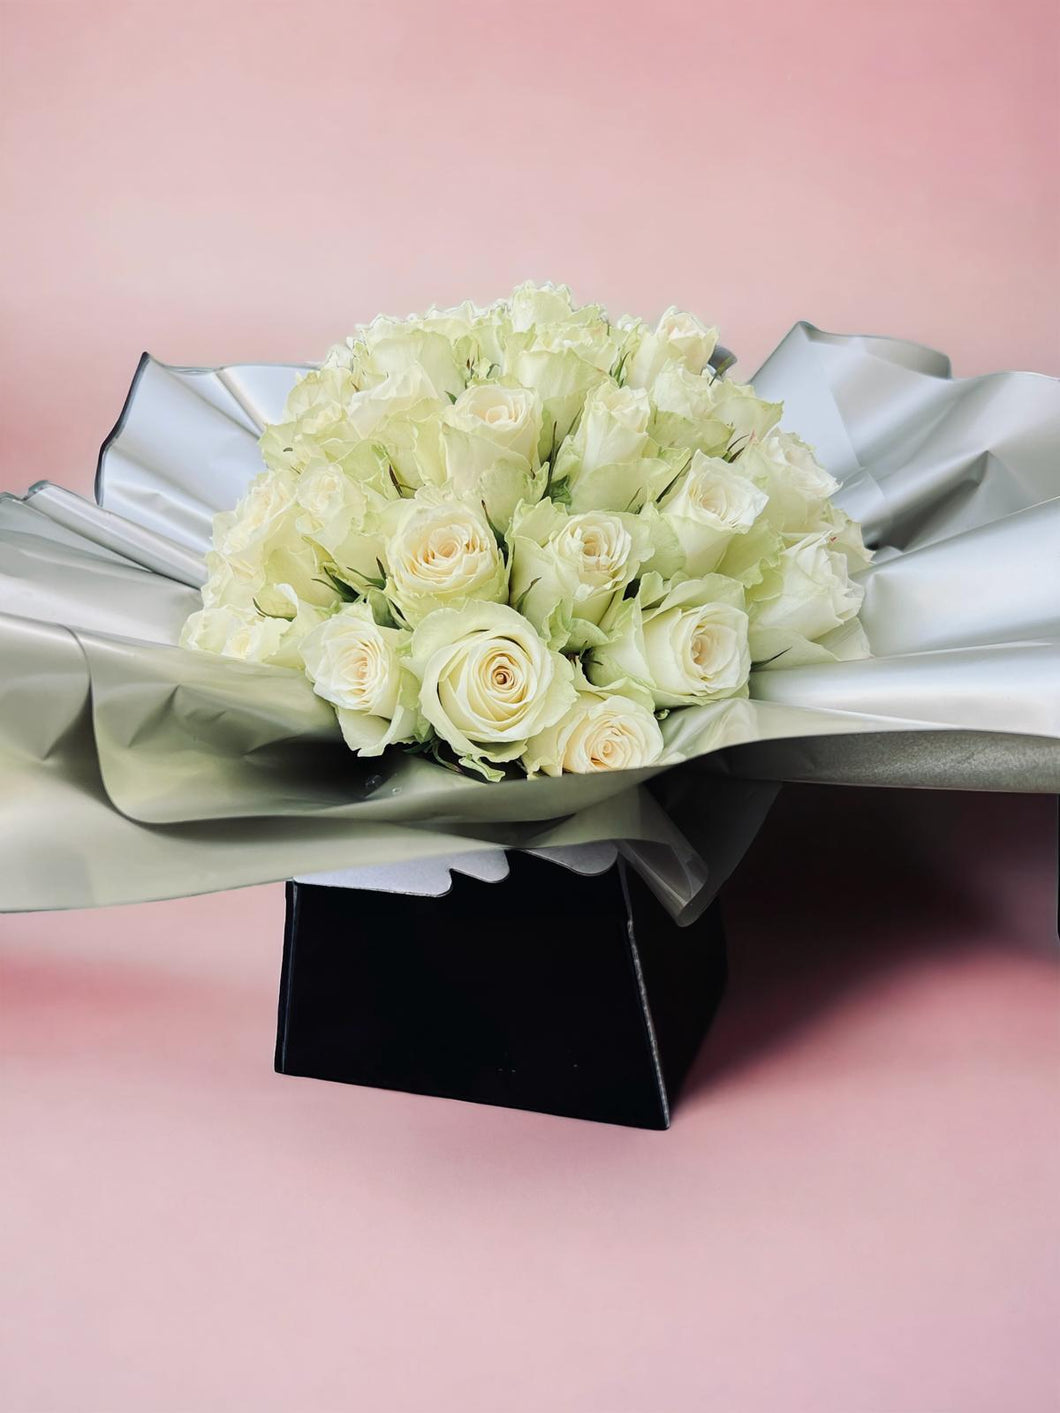 50 White Rose Bouquet - Weekly Special